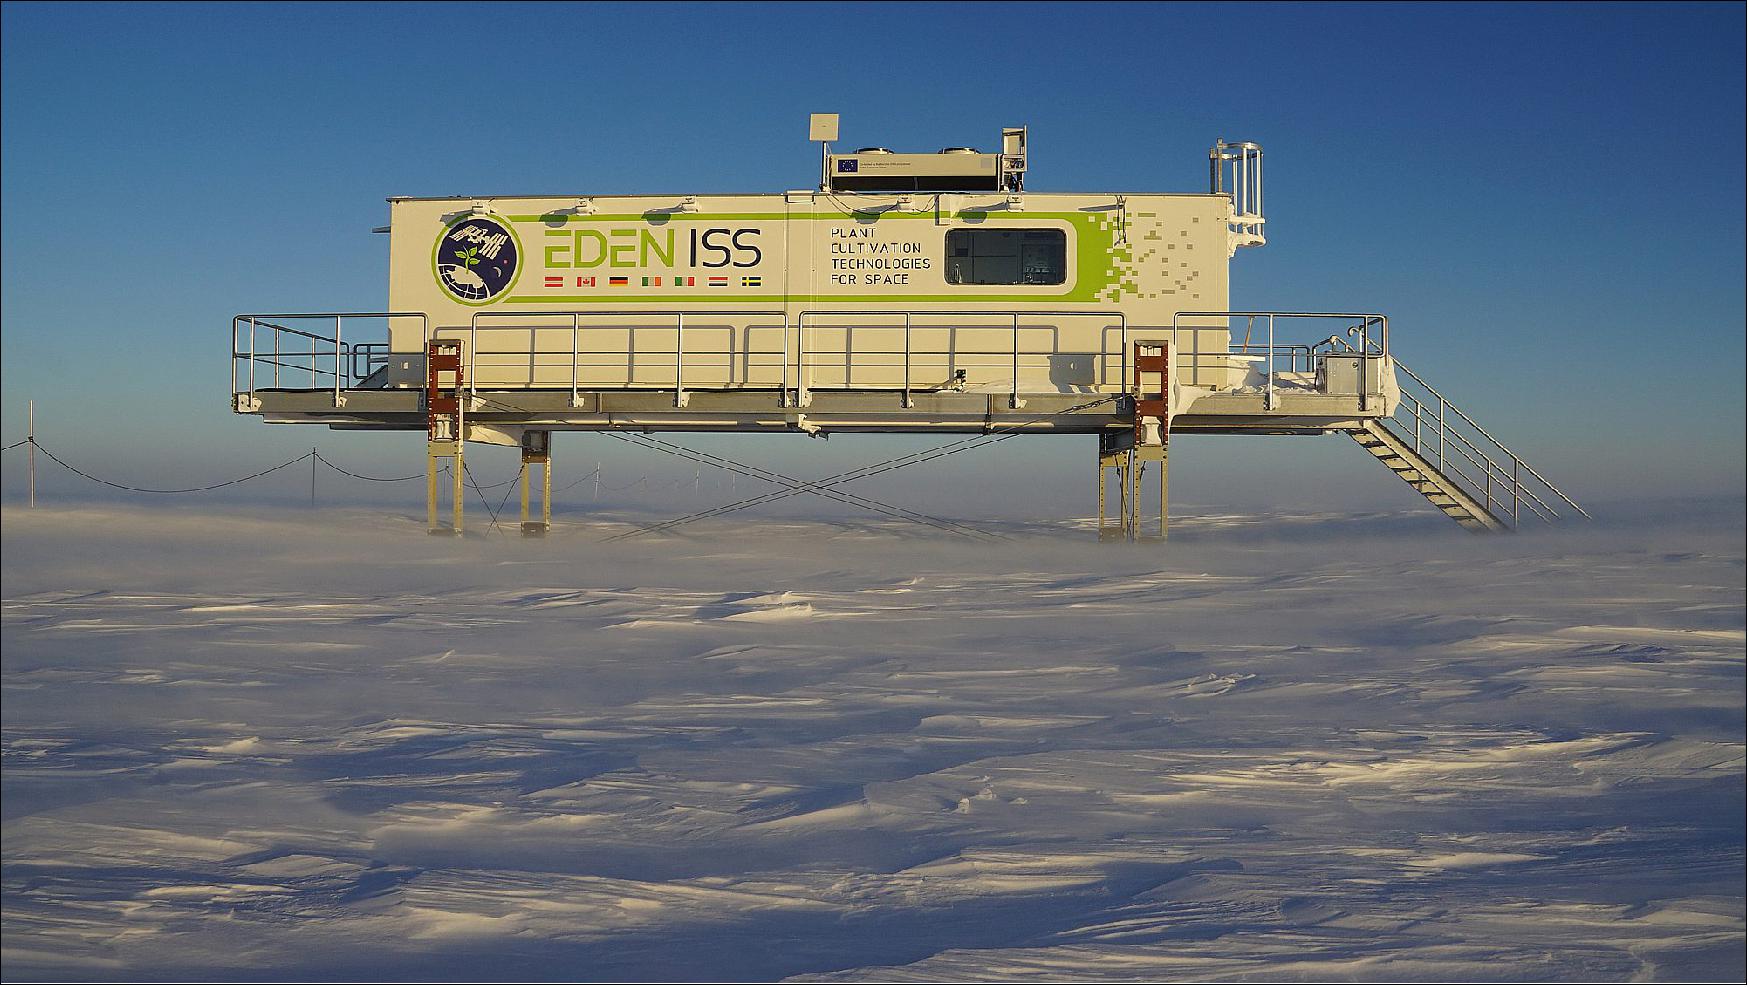 Figure 18: EDEN ISS, the garden center of Jess Bunchek for 2021, just 400 m away from the Neumayer III Station, developed by DLR in 2018 (photo credit: DLR)